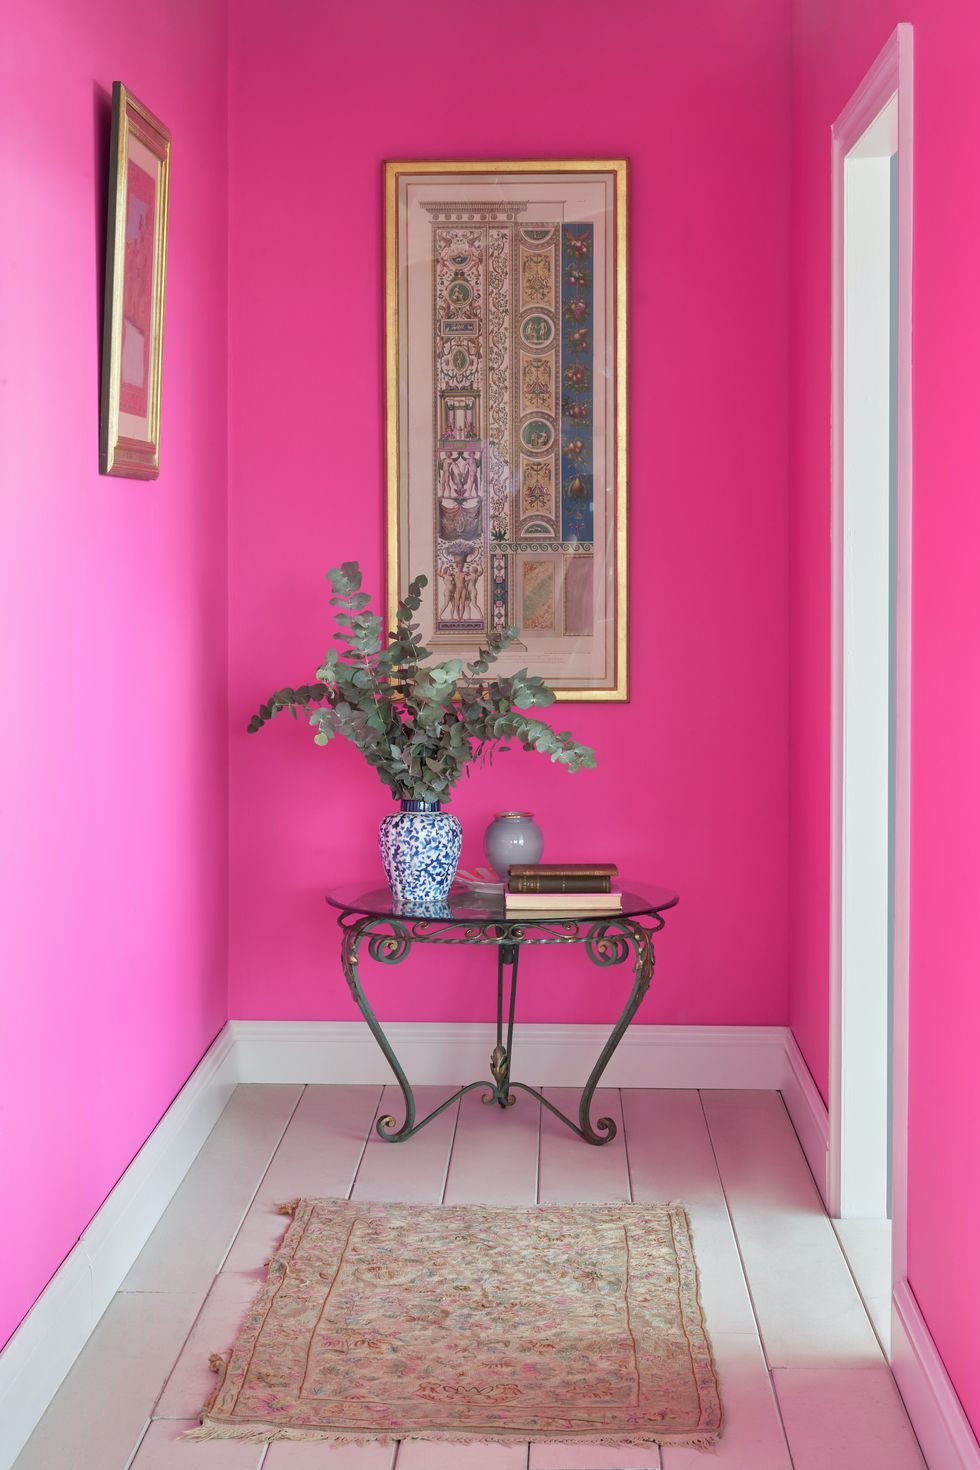 Which Colours Go Well With Pink? - Mylands